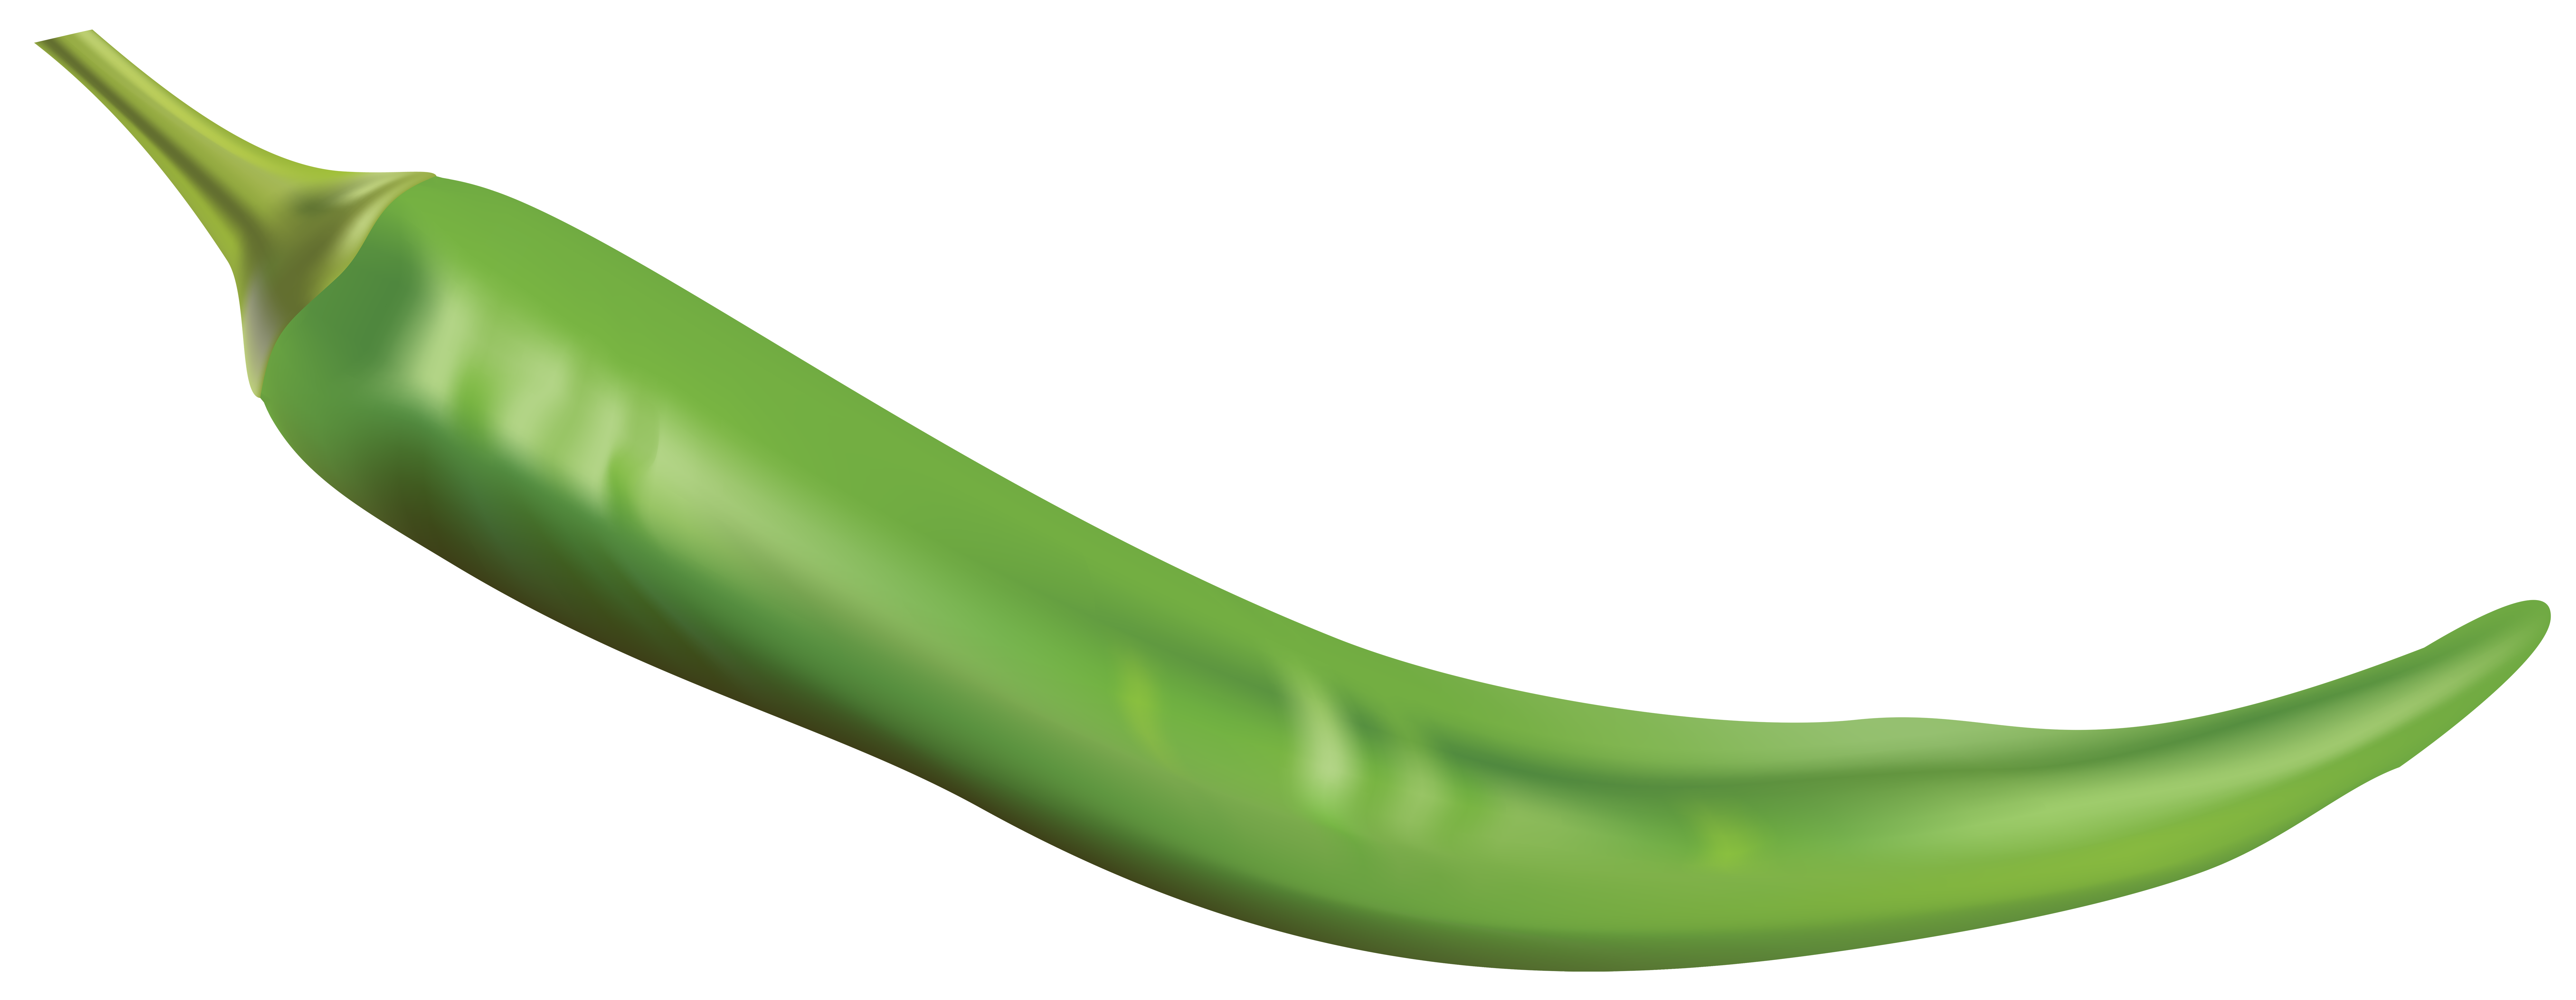 Chili pepper free png. Clipart vegetables green vegetable